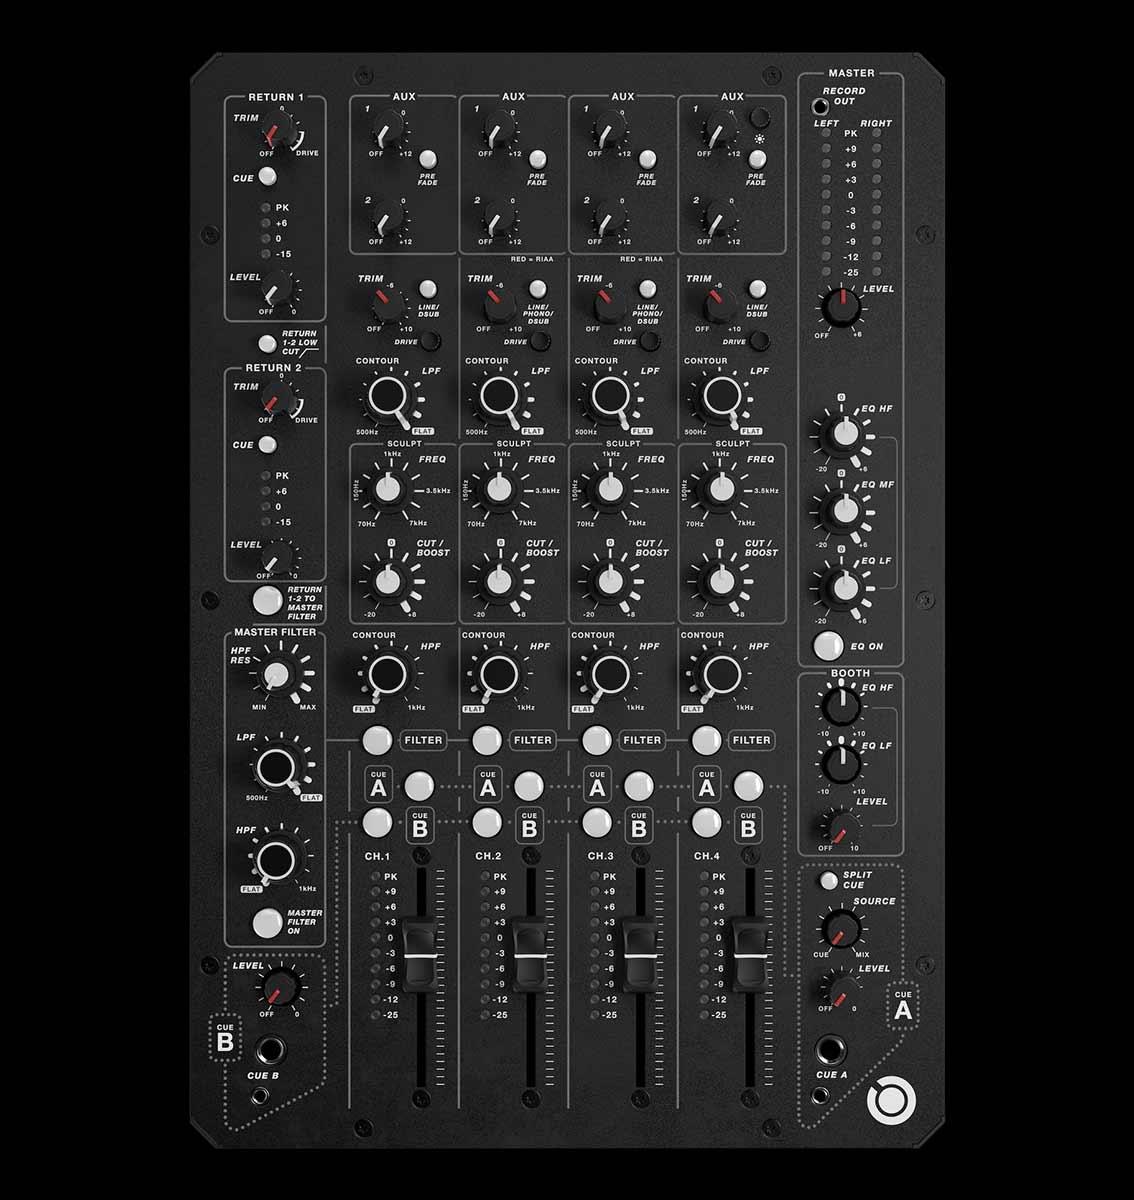 Top PLAYdifferently Model 1.4